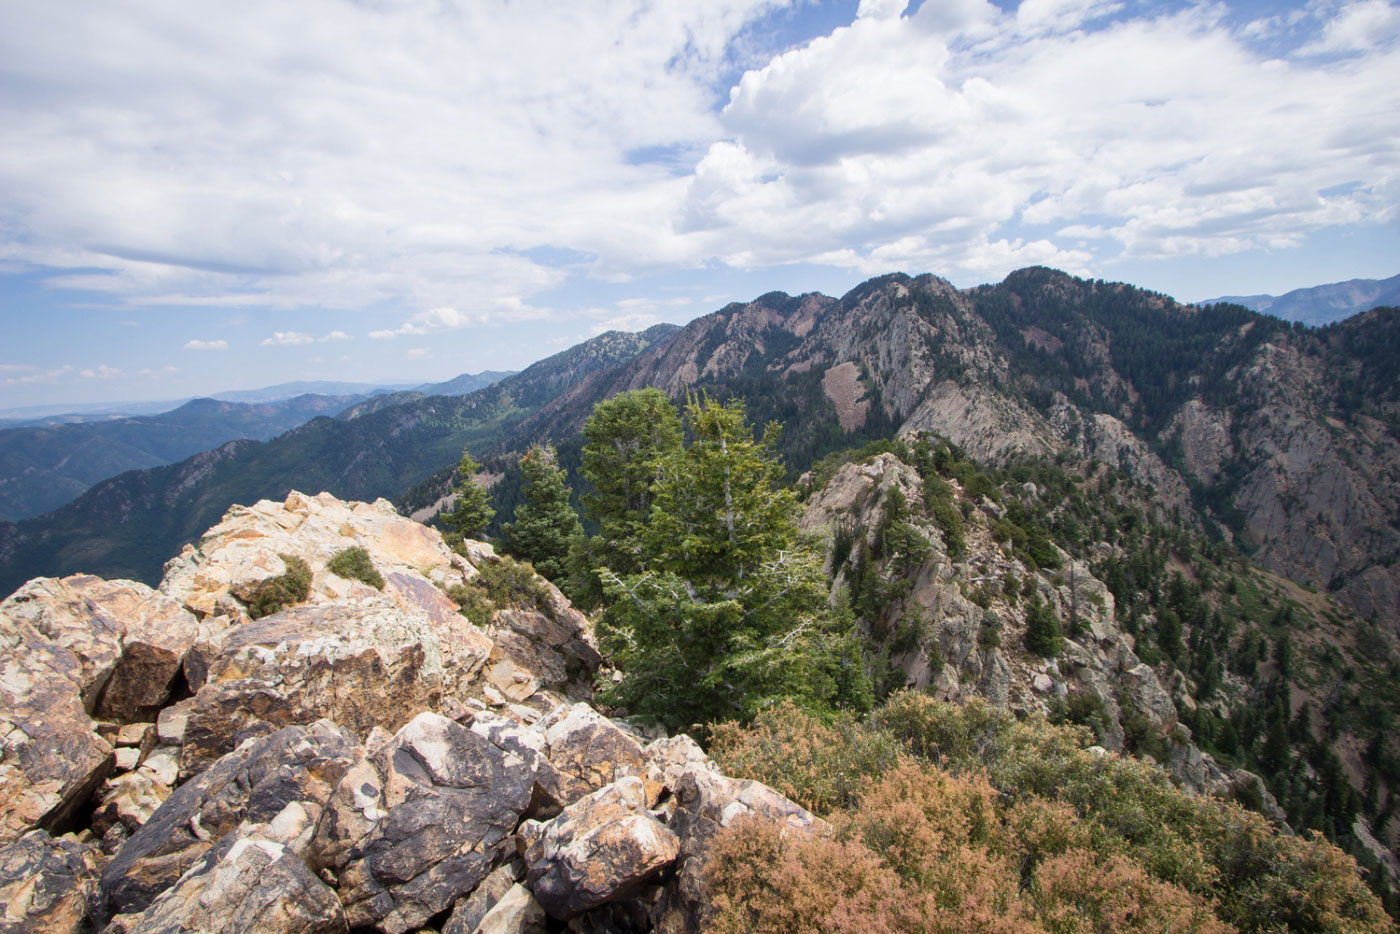 Hike Mount Olympus in Wasatch-Cache National Forest, Utah - Stav is Lost